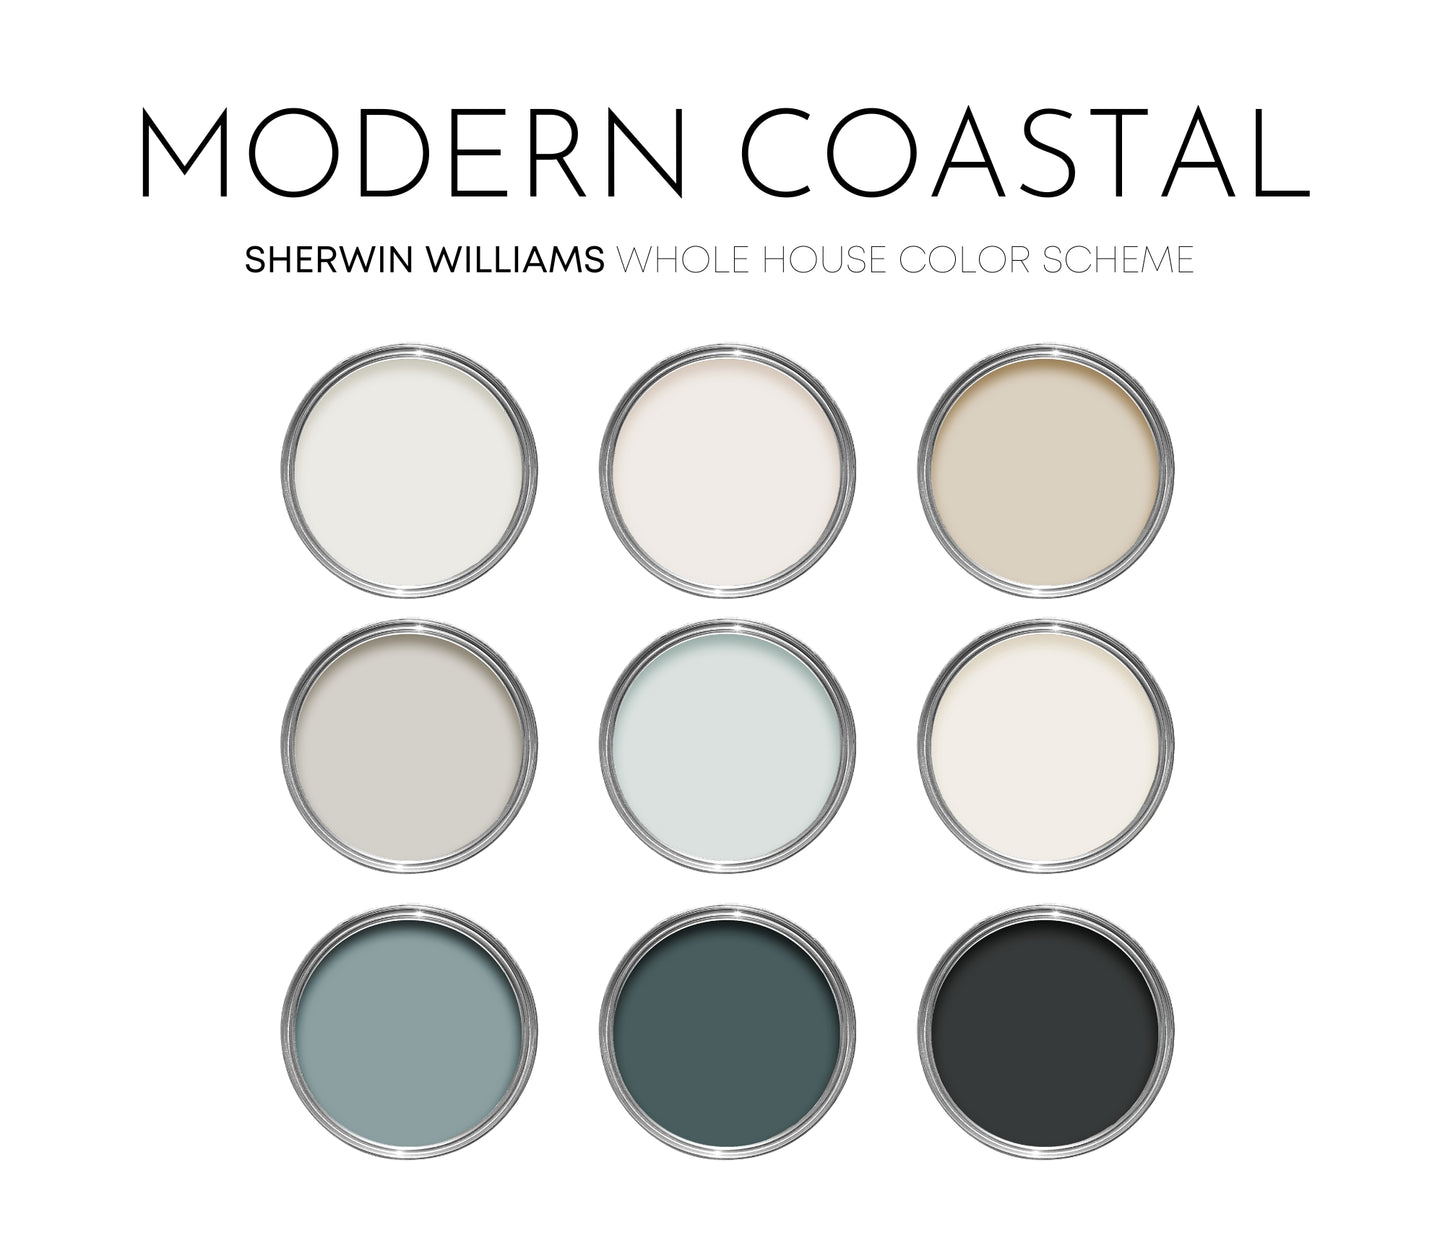 Modern Coastal Sherwin Williams Paint Palette - Modern Neutral Interior Paint Colors for Home, Coastal Interior Design Color Palette